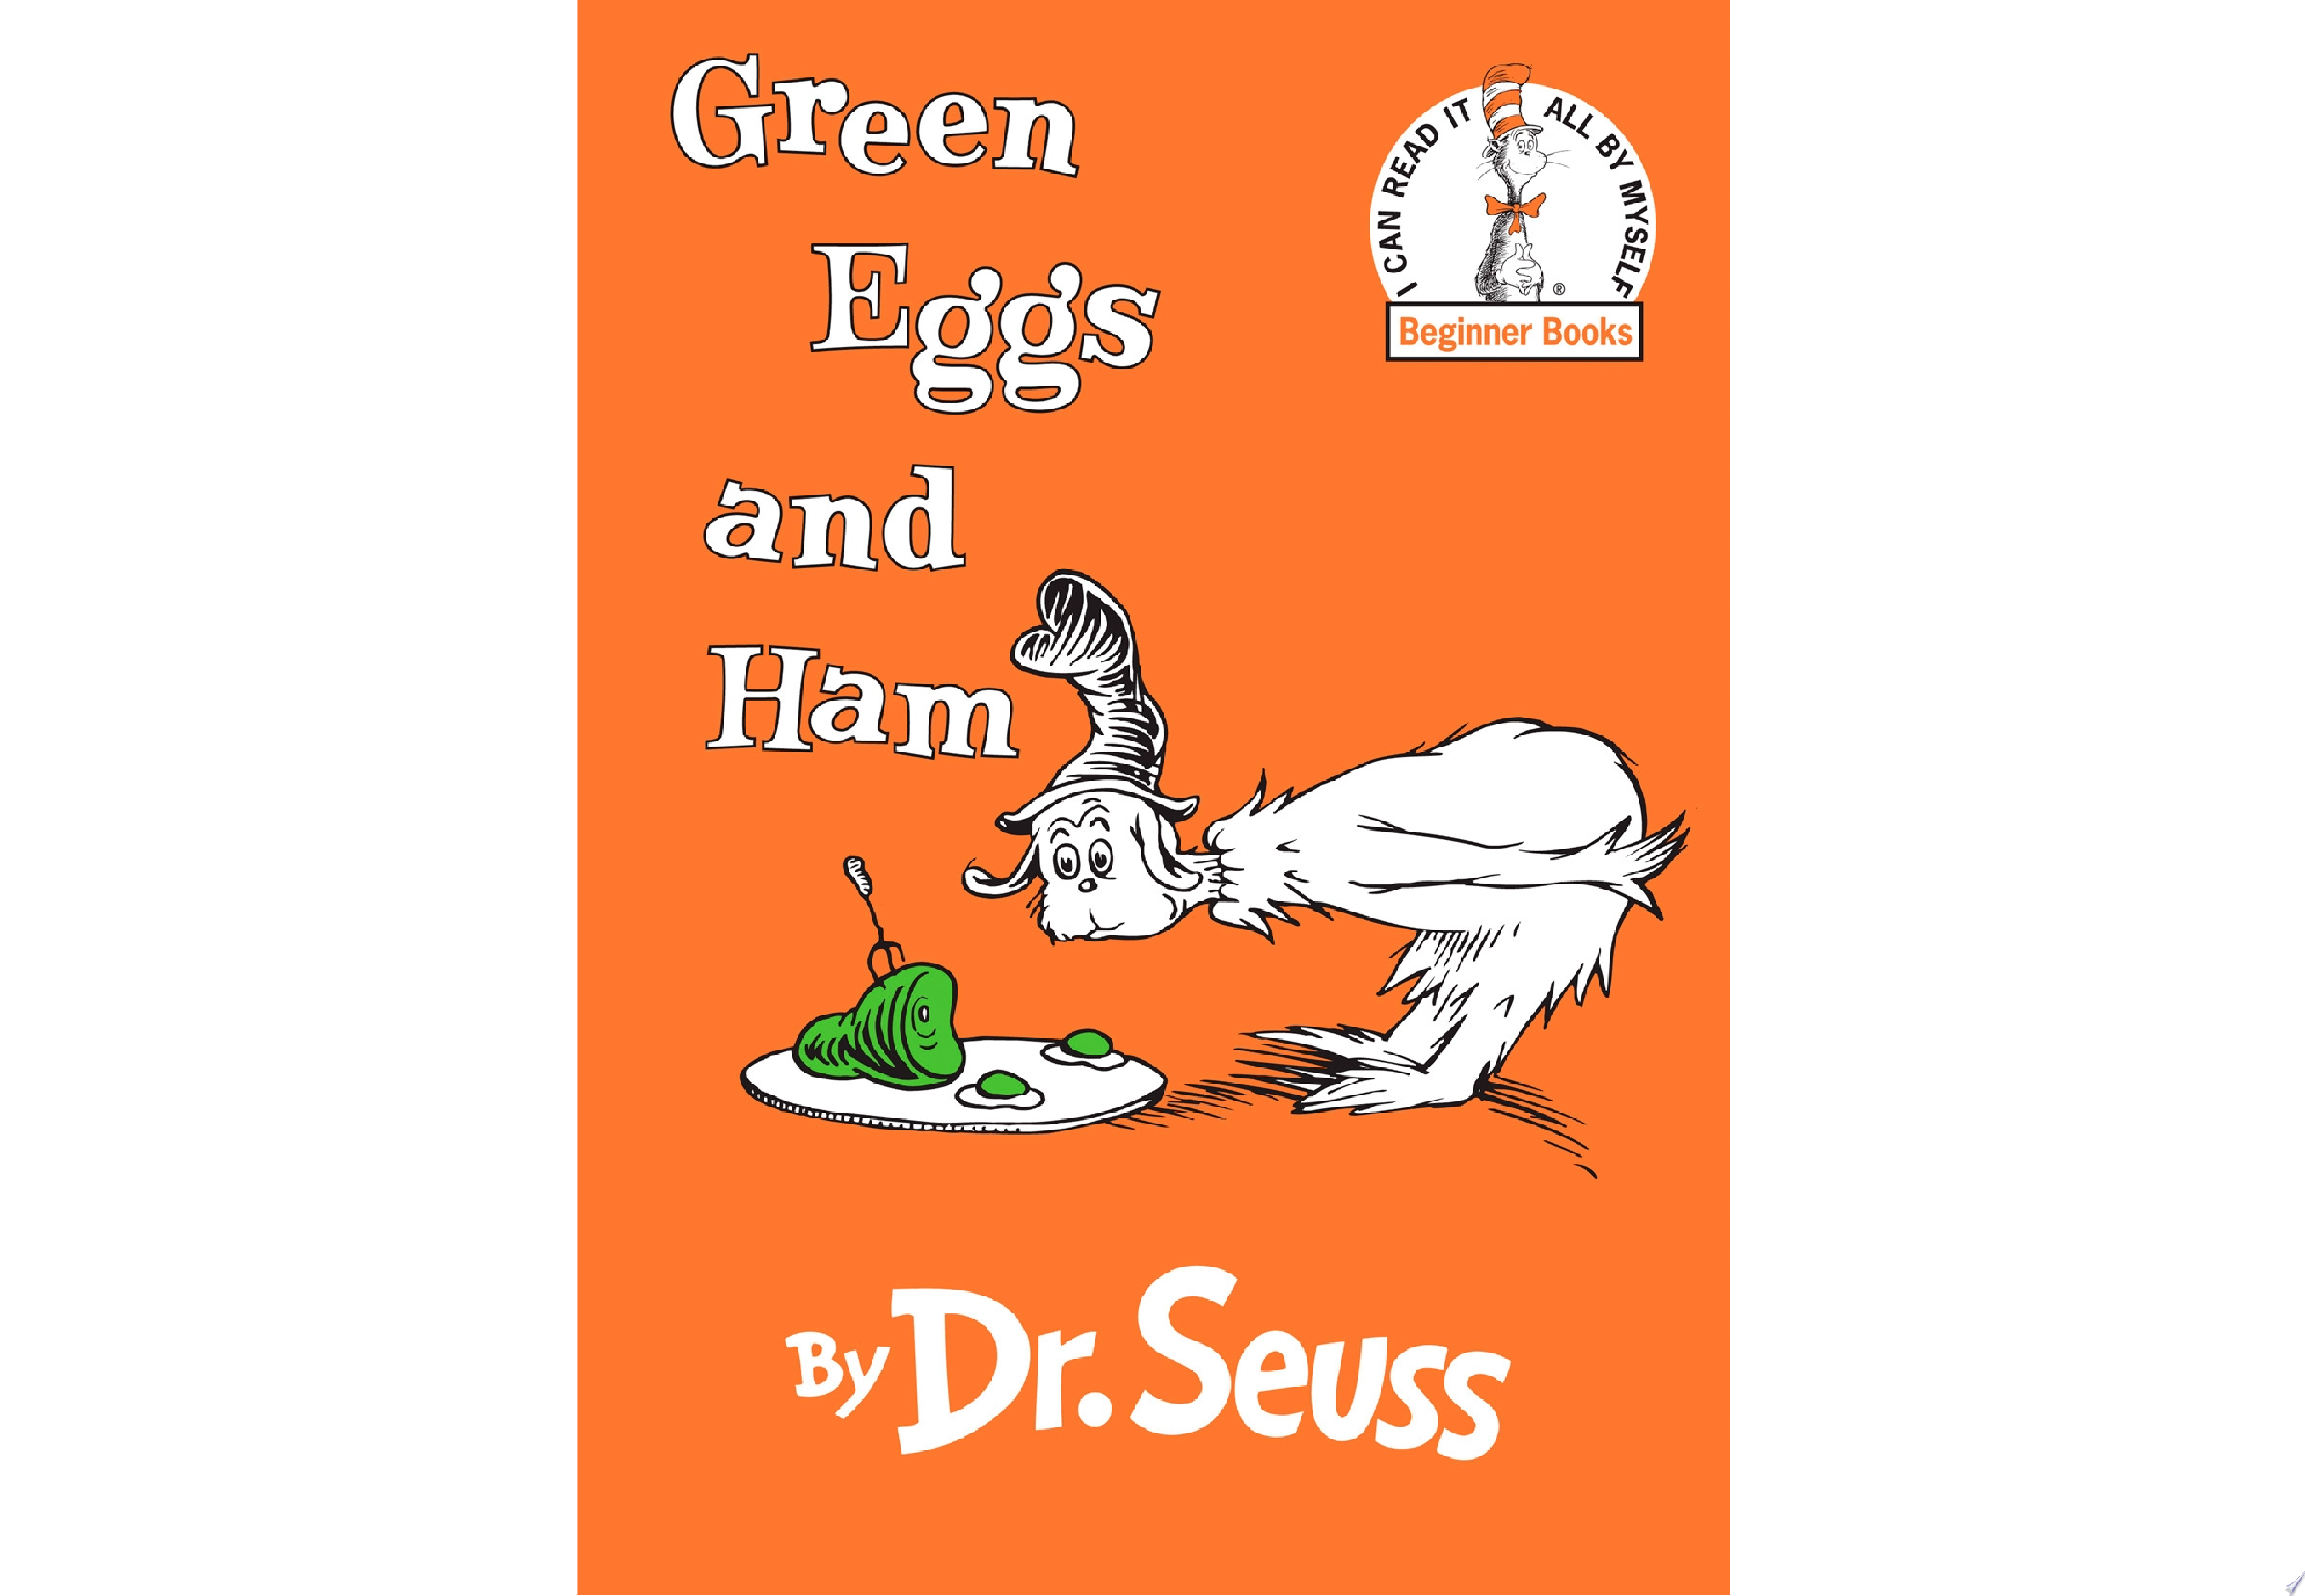 Image for "Green Eggs and Ham"